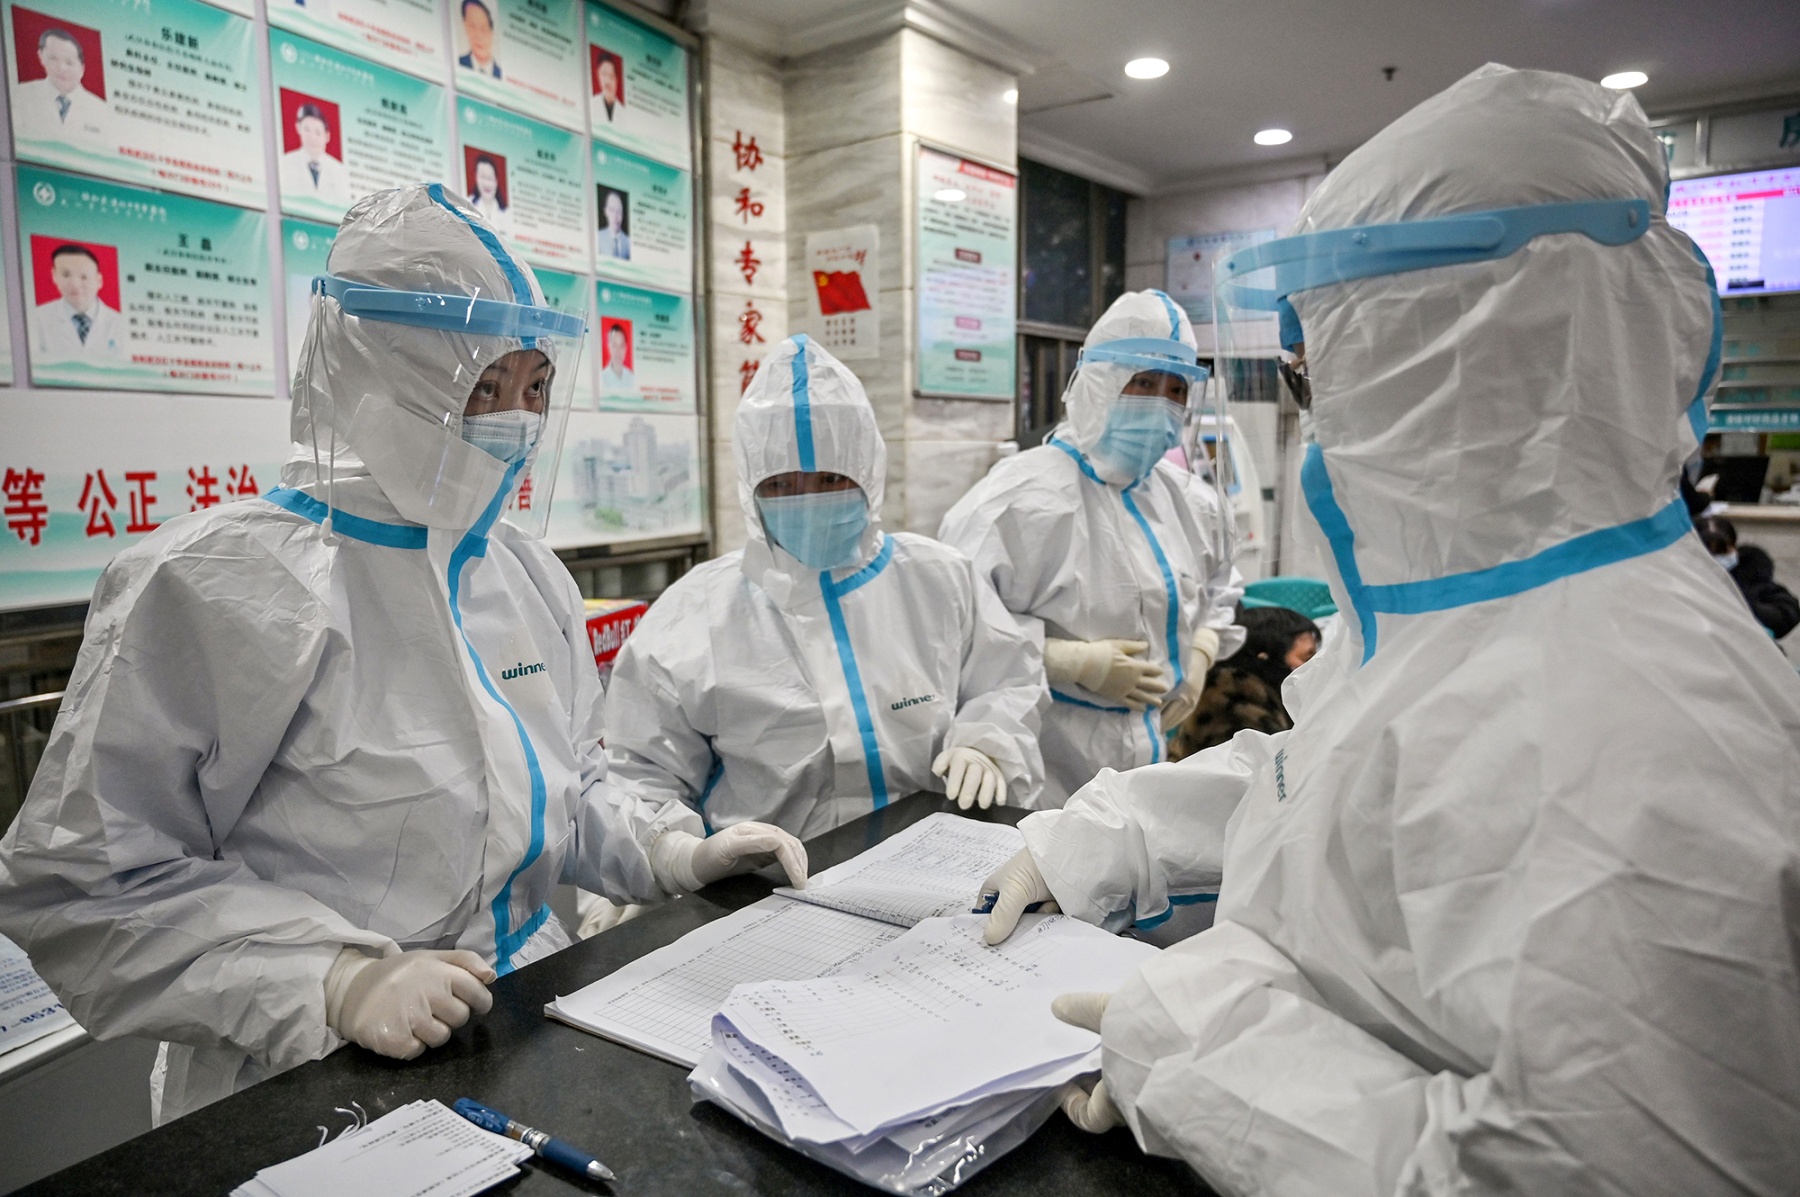 Medical staff members wear&nbsp;protective clothing at the Wuhan Red Cross Hospital in Wuhan on Jan. 25.&nbsp;